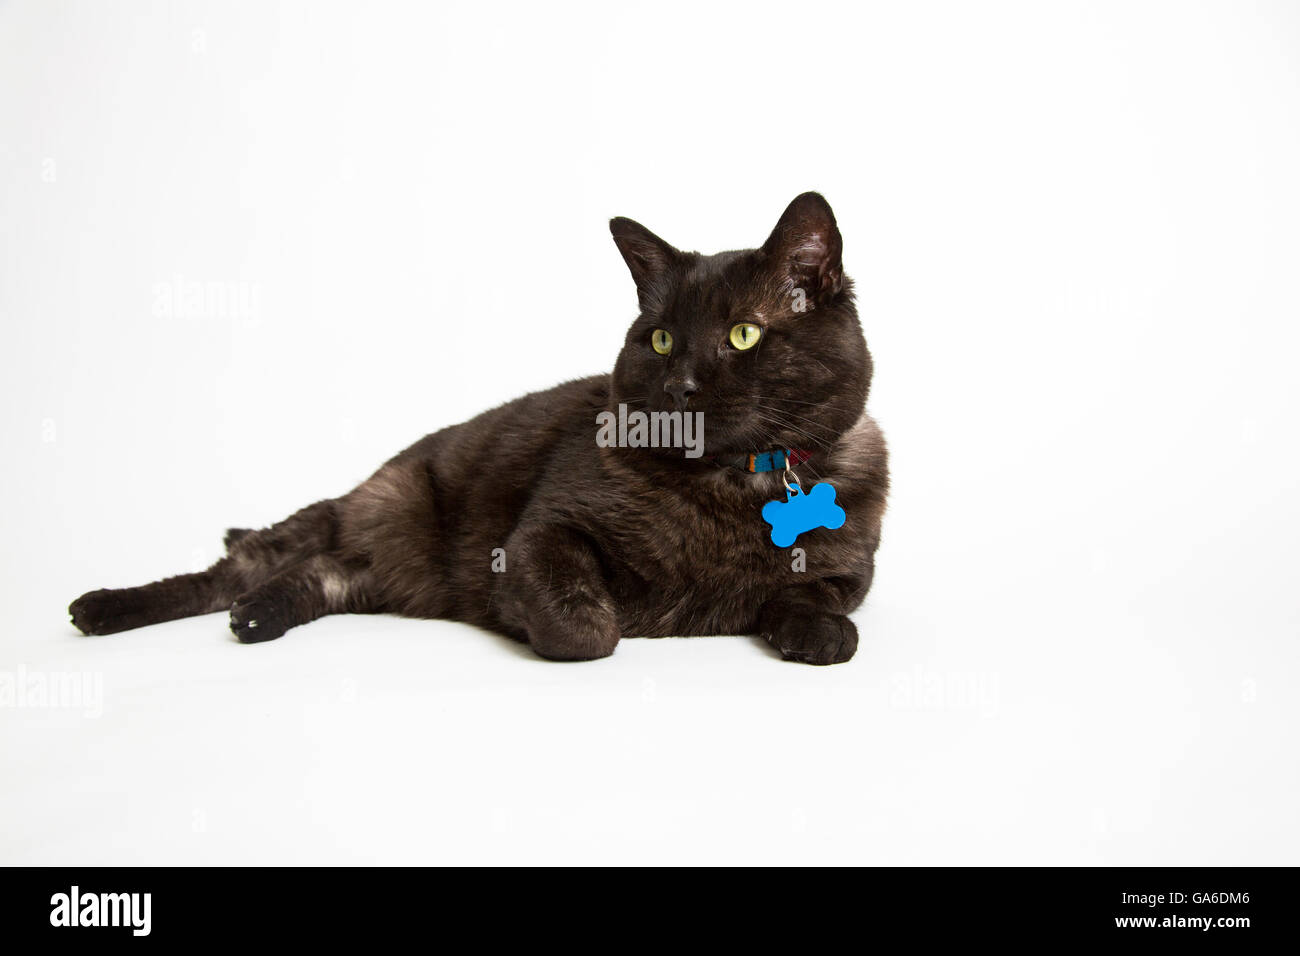 A black cat on a white background Stock Photo